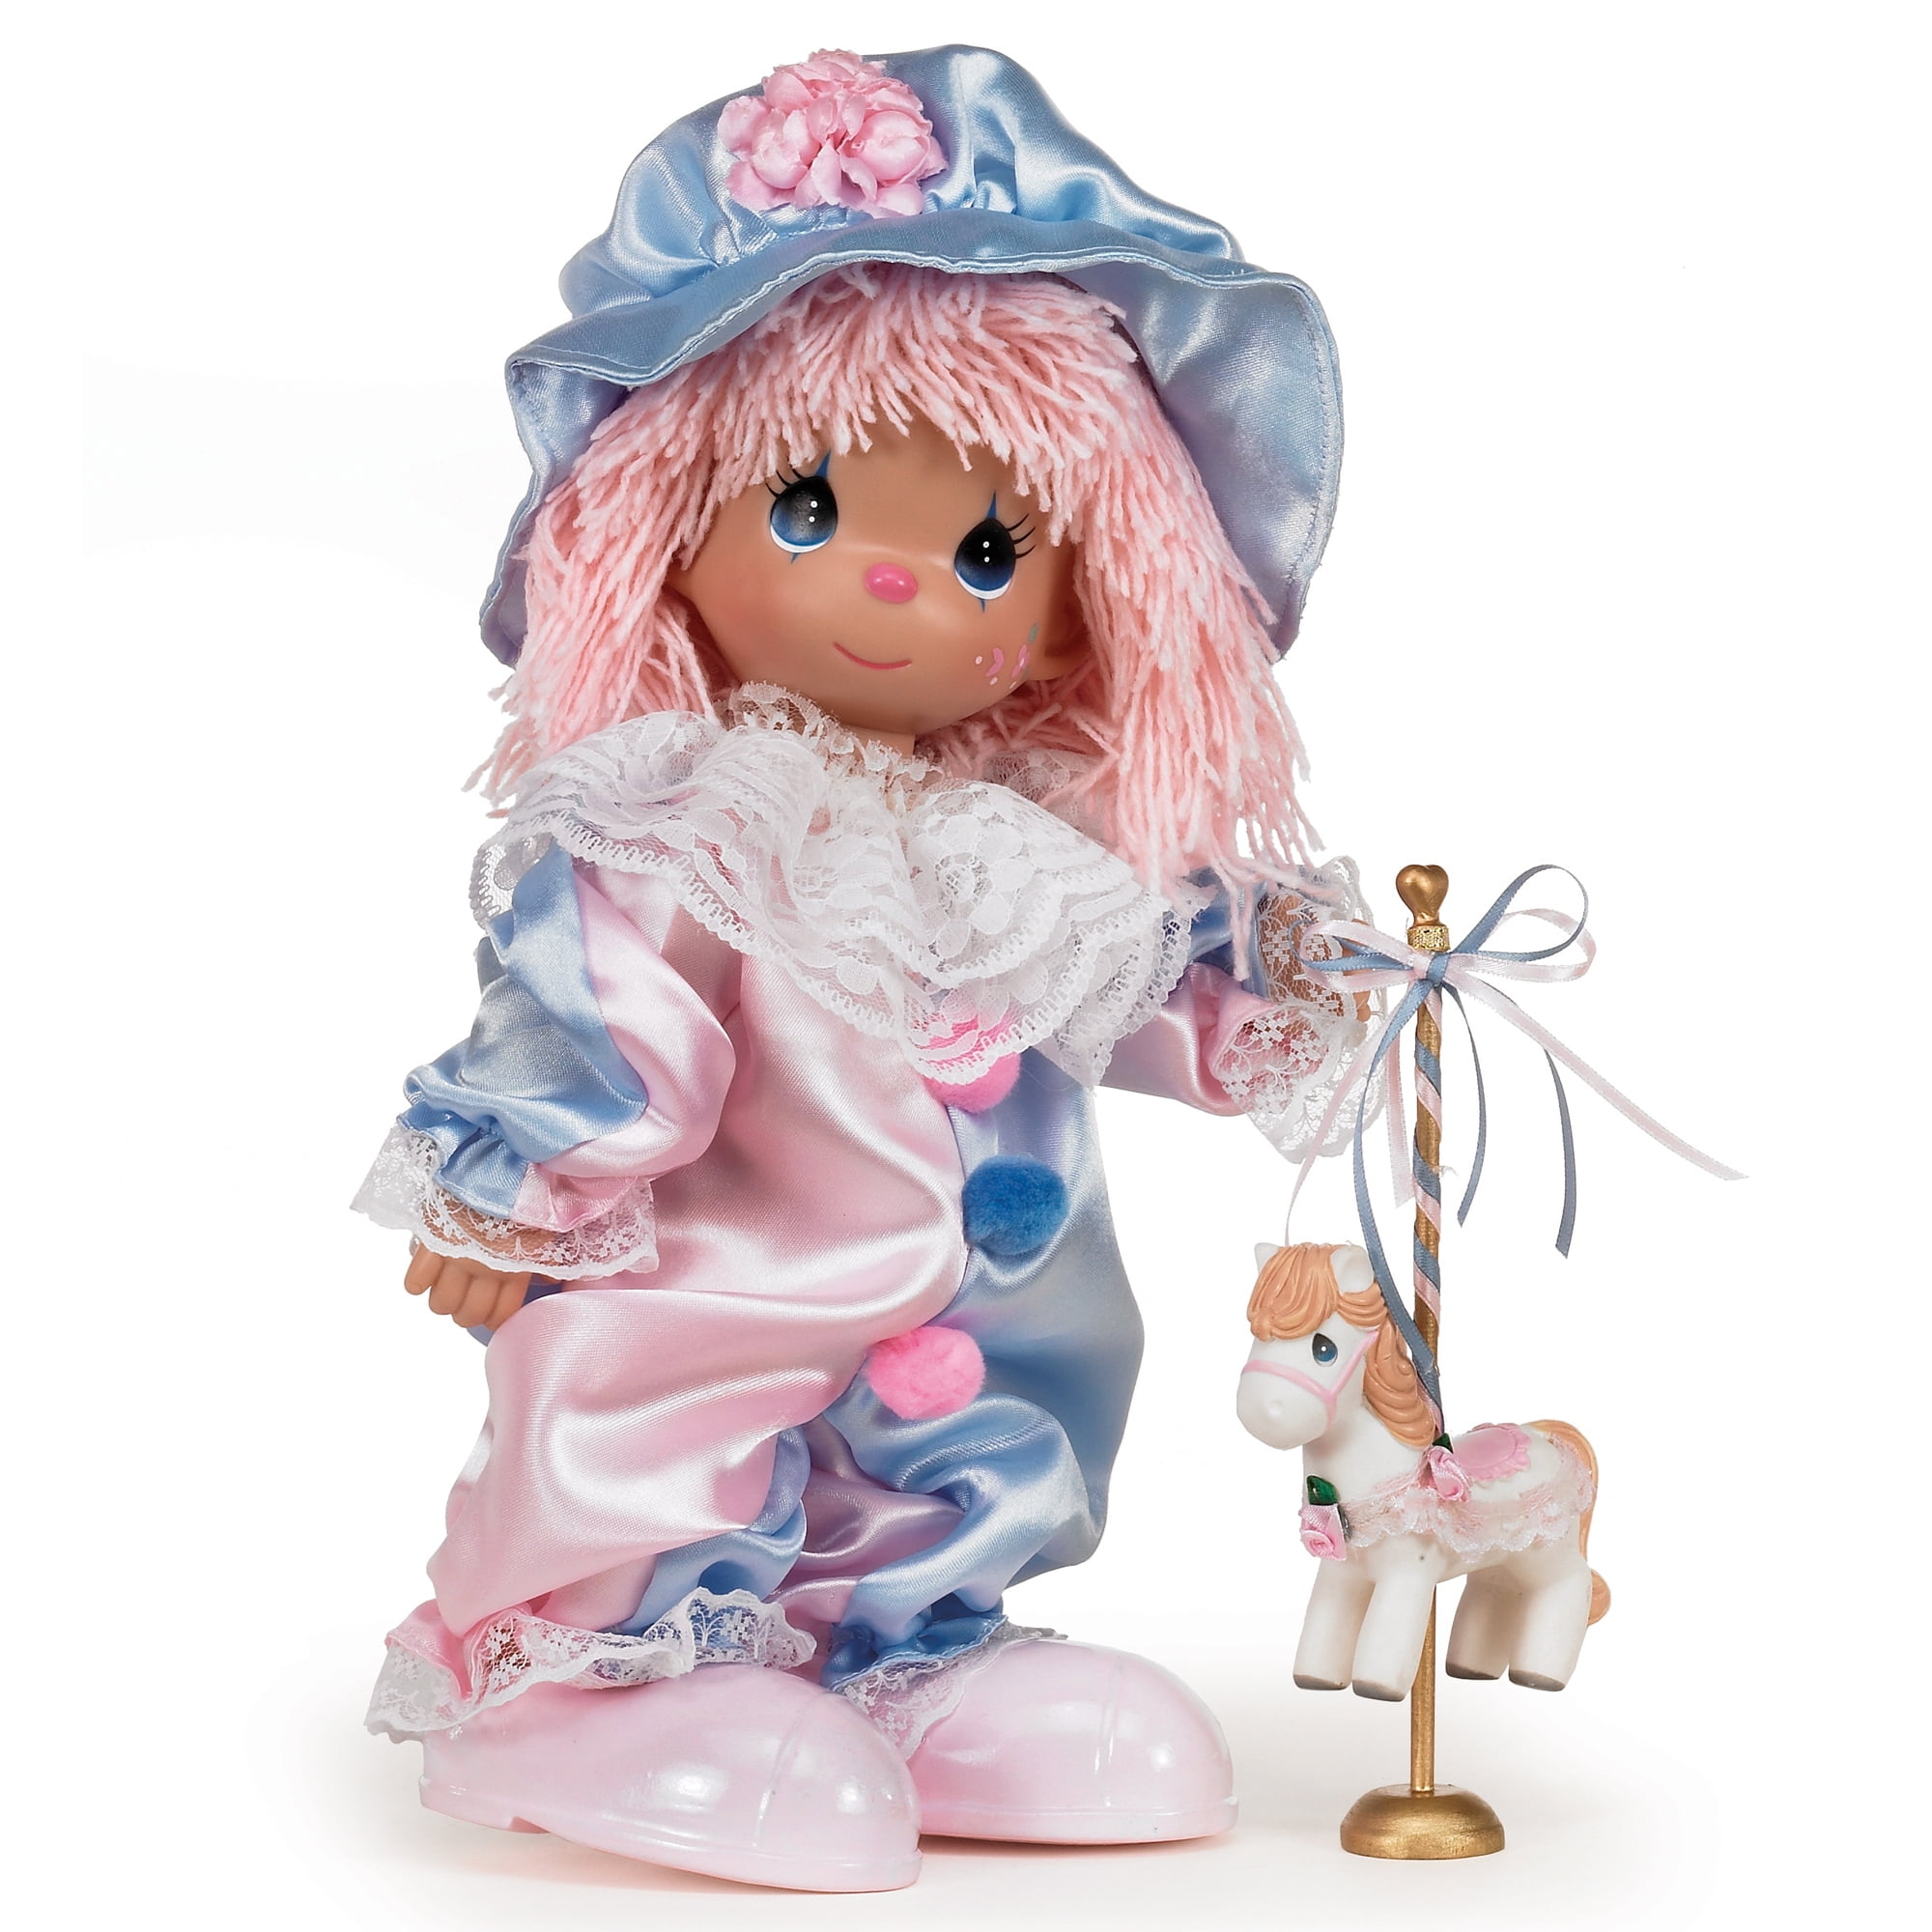 Heartfelt Wishes Precious Moments Dolls by The Doll Maker 12 inch Doll PRCM9 6601 Linda Rick Kayleigh